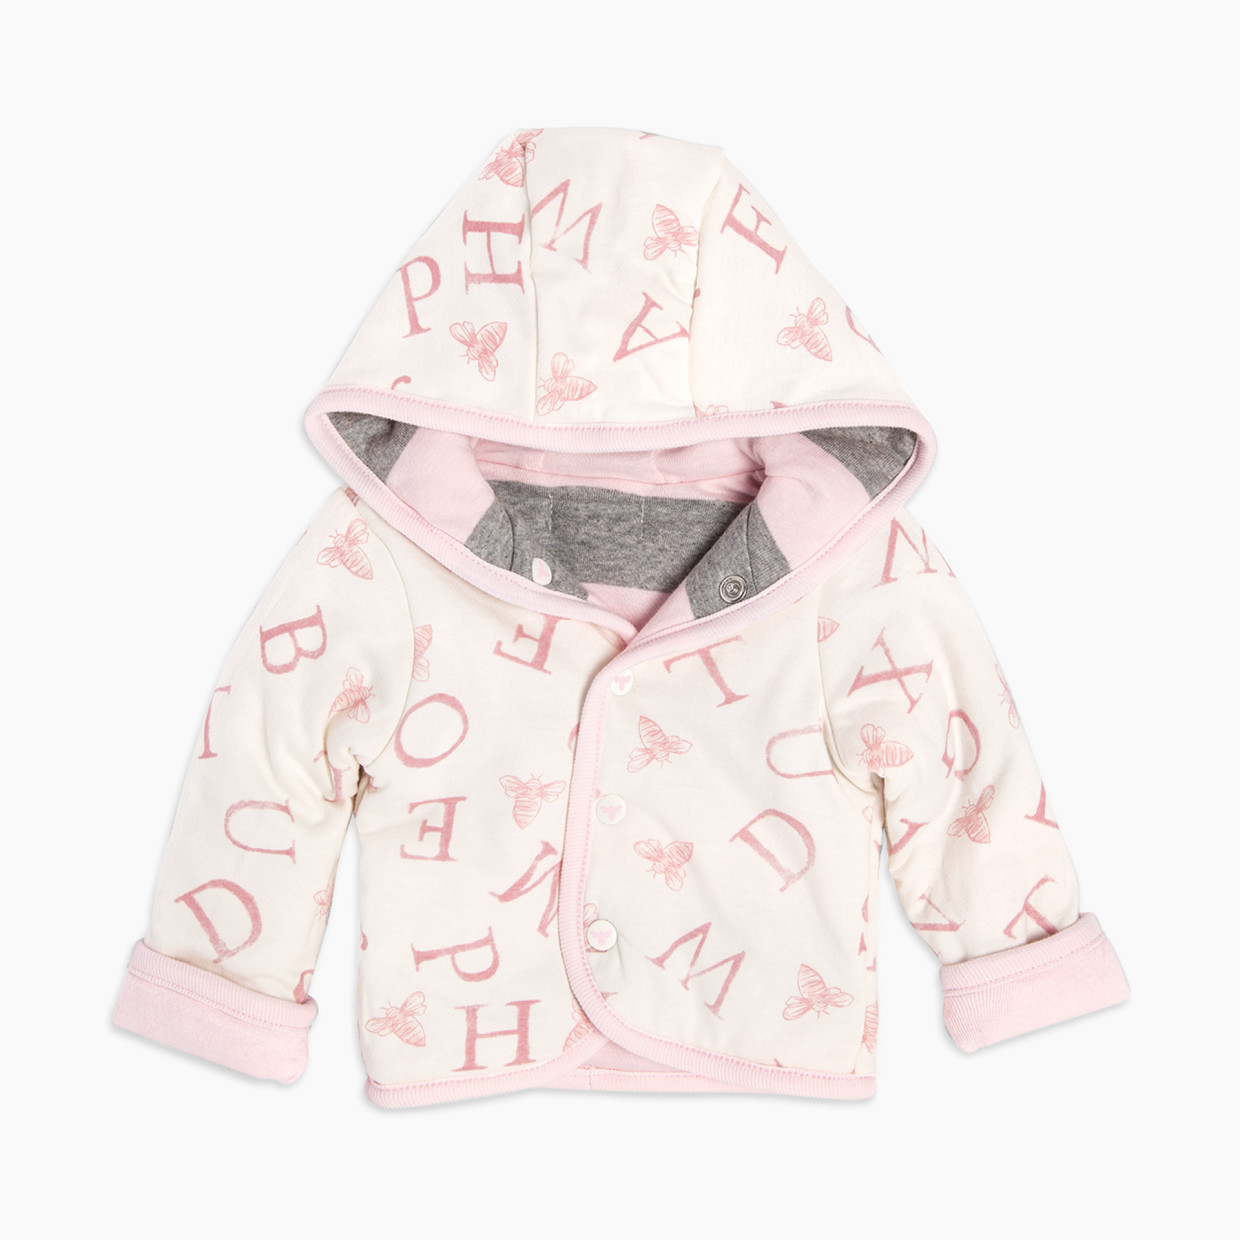 Burt's Bees Baby Organic Watercolor A Bee C Reversible Jacket - Blossom, 0-3 Months.